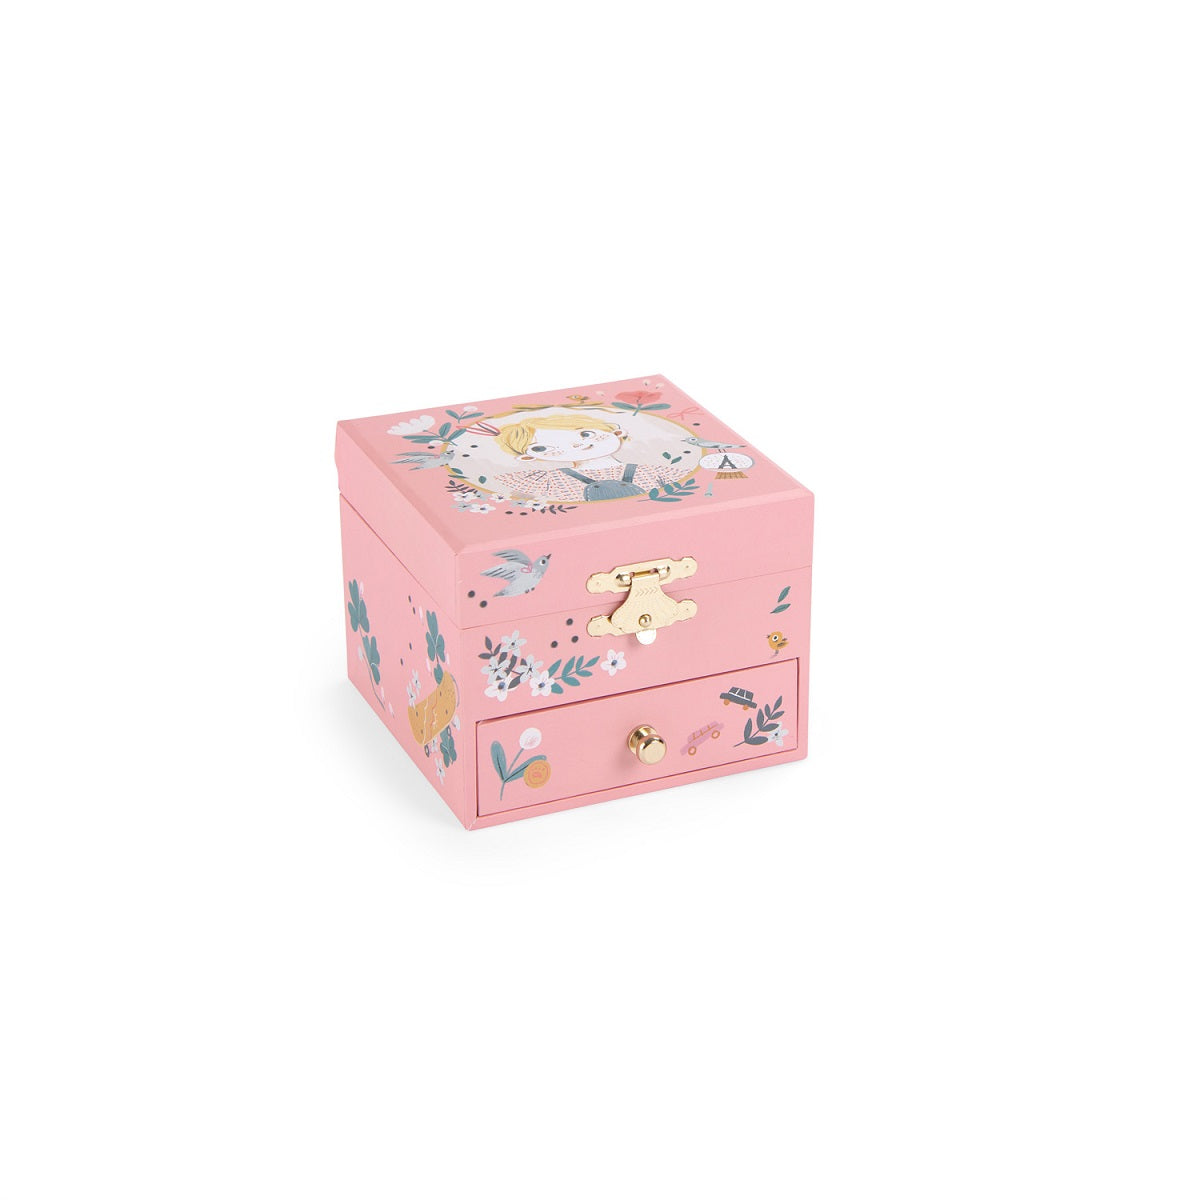 Moulin Roty - Parisiennes - Musical Jewellery Box